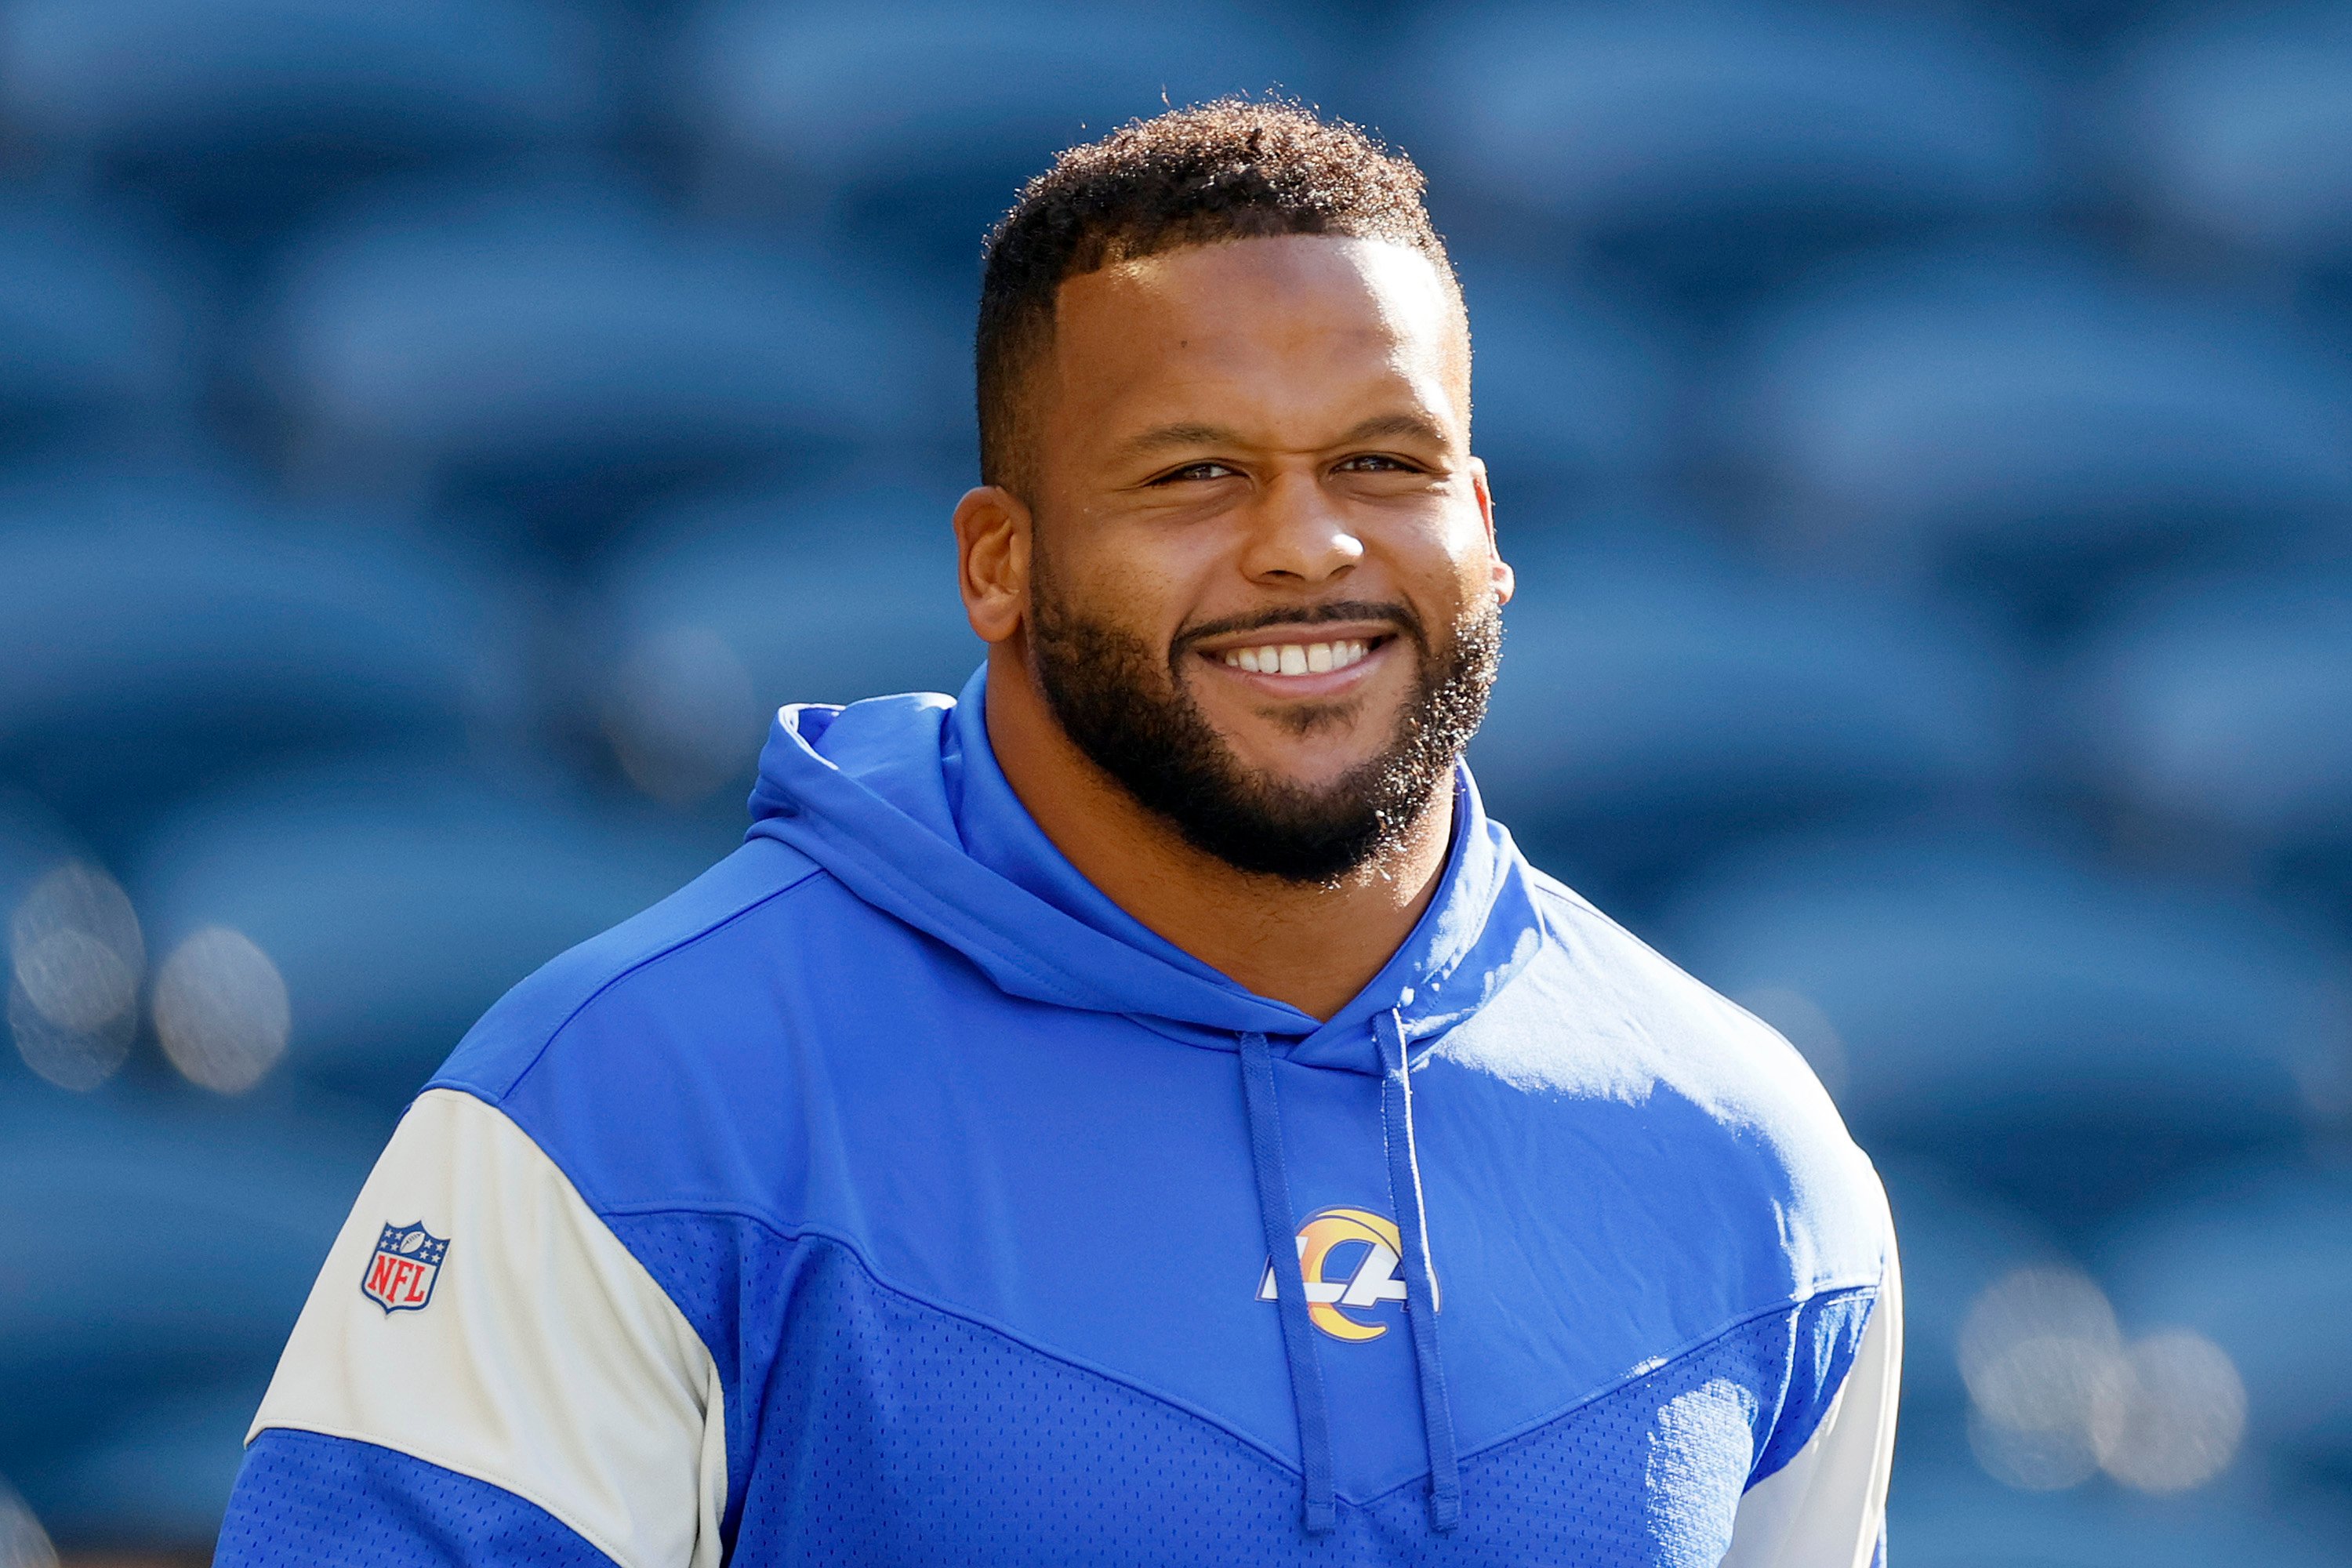 Aaron Donald of the Los Angeles Rams smiling on the field before a game against the Seattle Seahawks